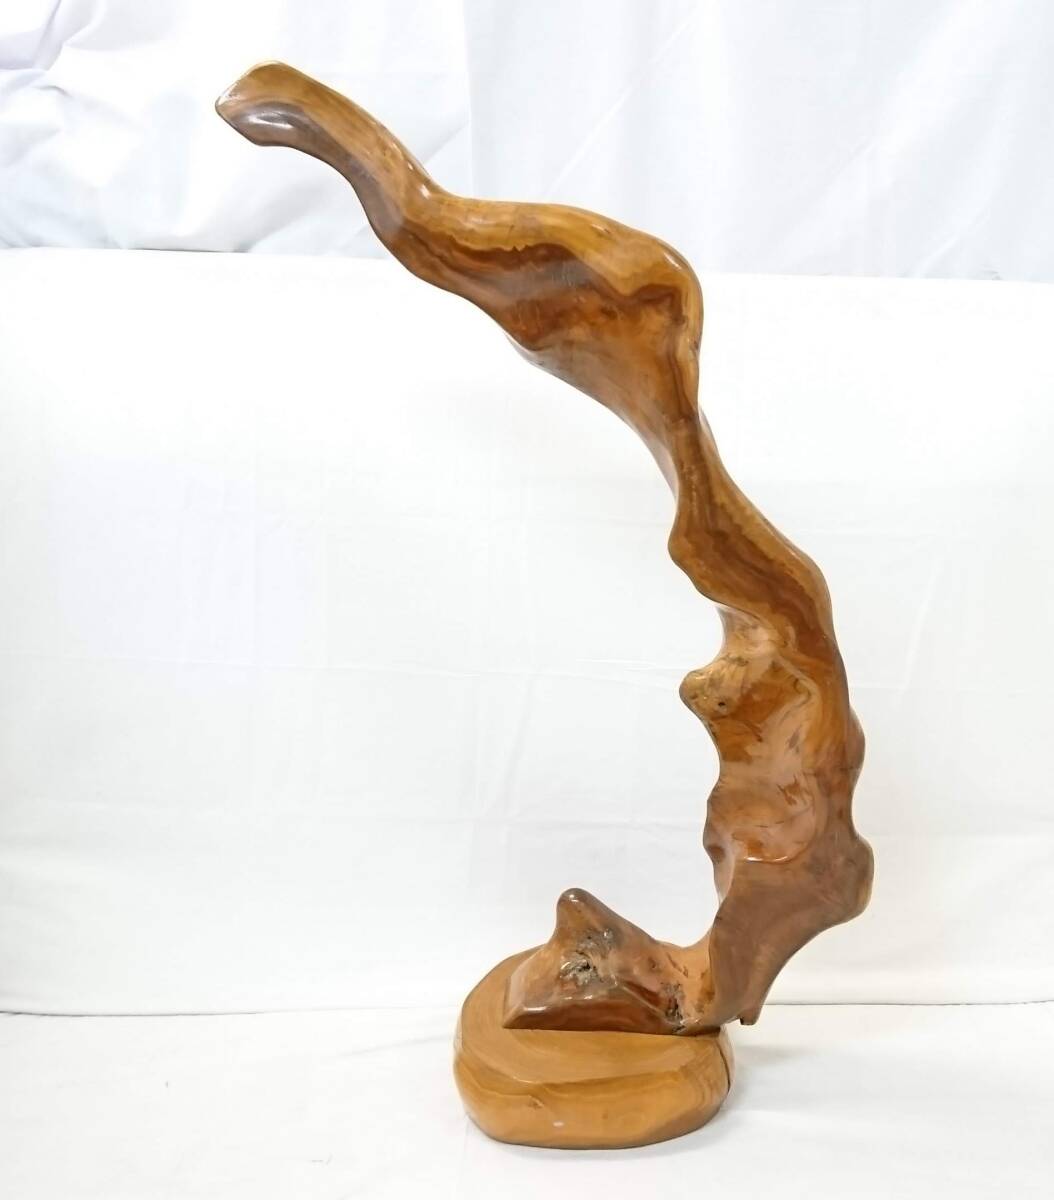 [.. soup ] natural tree objet d'art / wooden ornament / interior / driftwood stand / approximately 110×66×35cm/ weight approximately 12.2kg/ decoration tree / entranceway decoration / floor between decoration /20-ZMA15